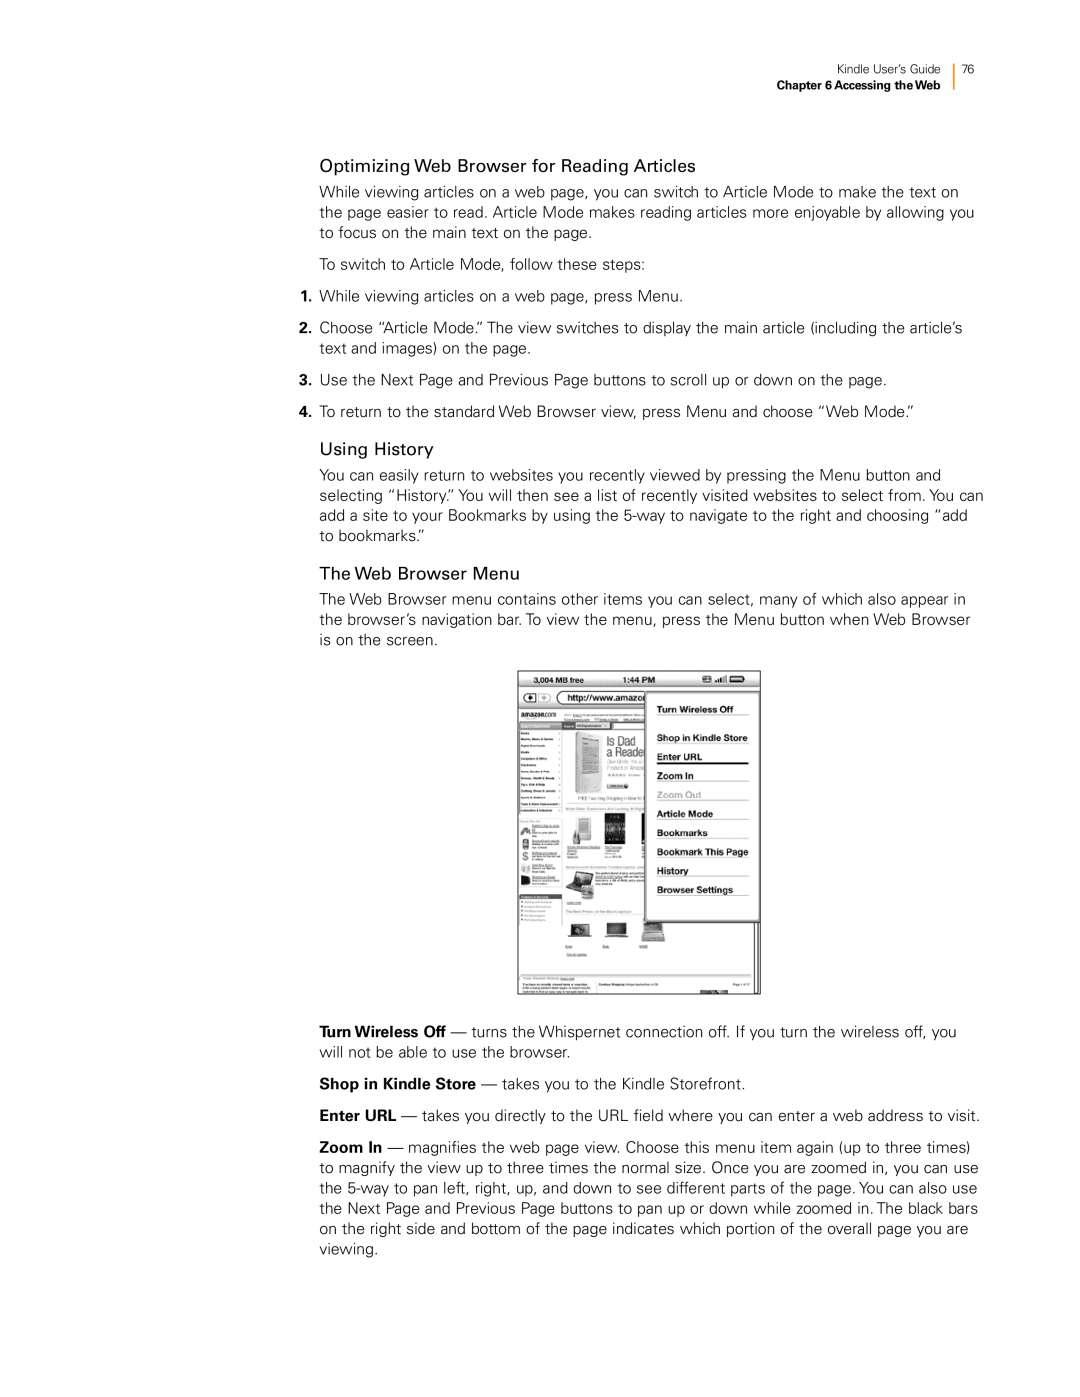 Amazon KNDKYBRD3G manual Optimizing Web Browser for Reading Articles, Using History, The Web Browser Menu 